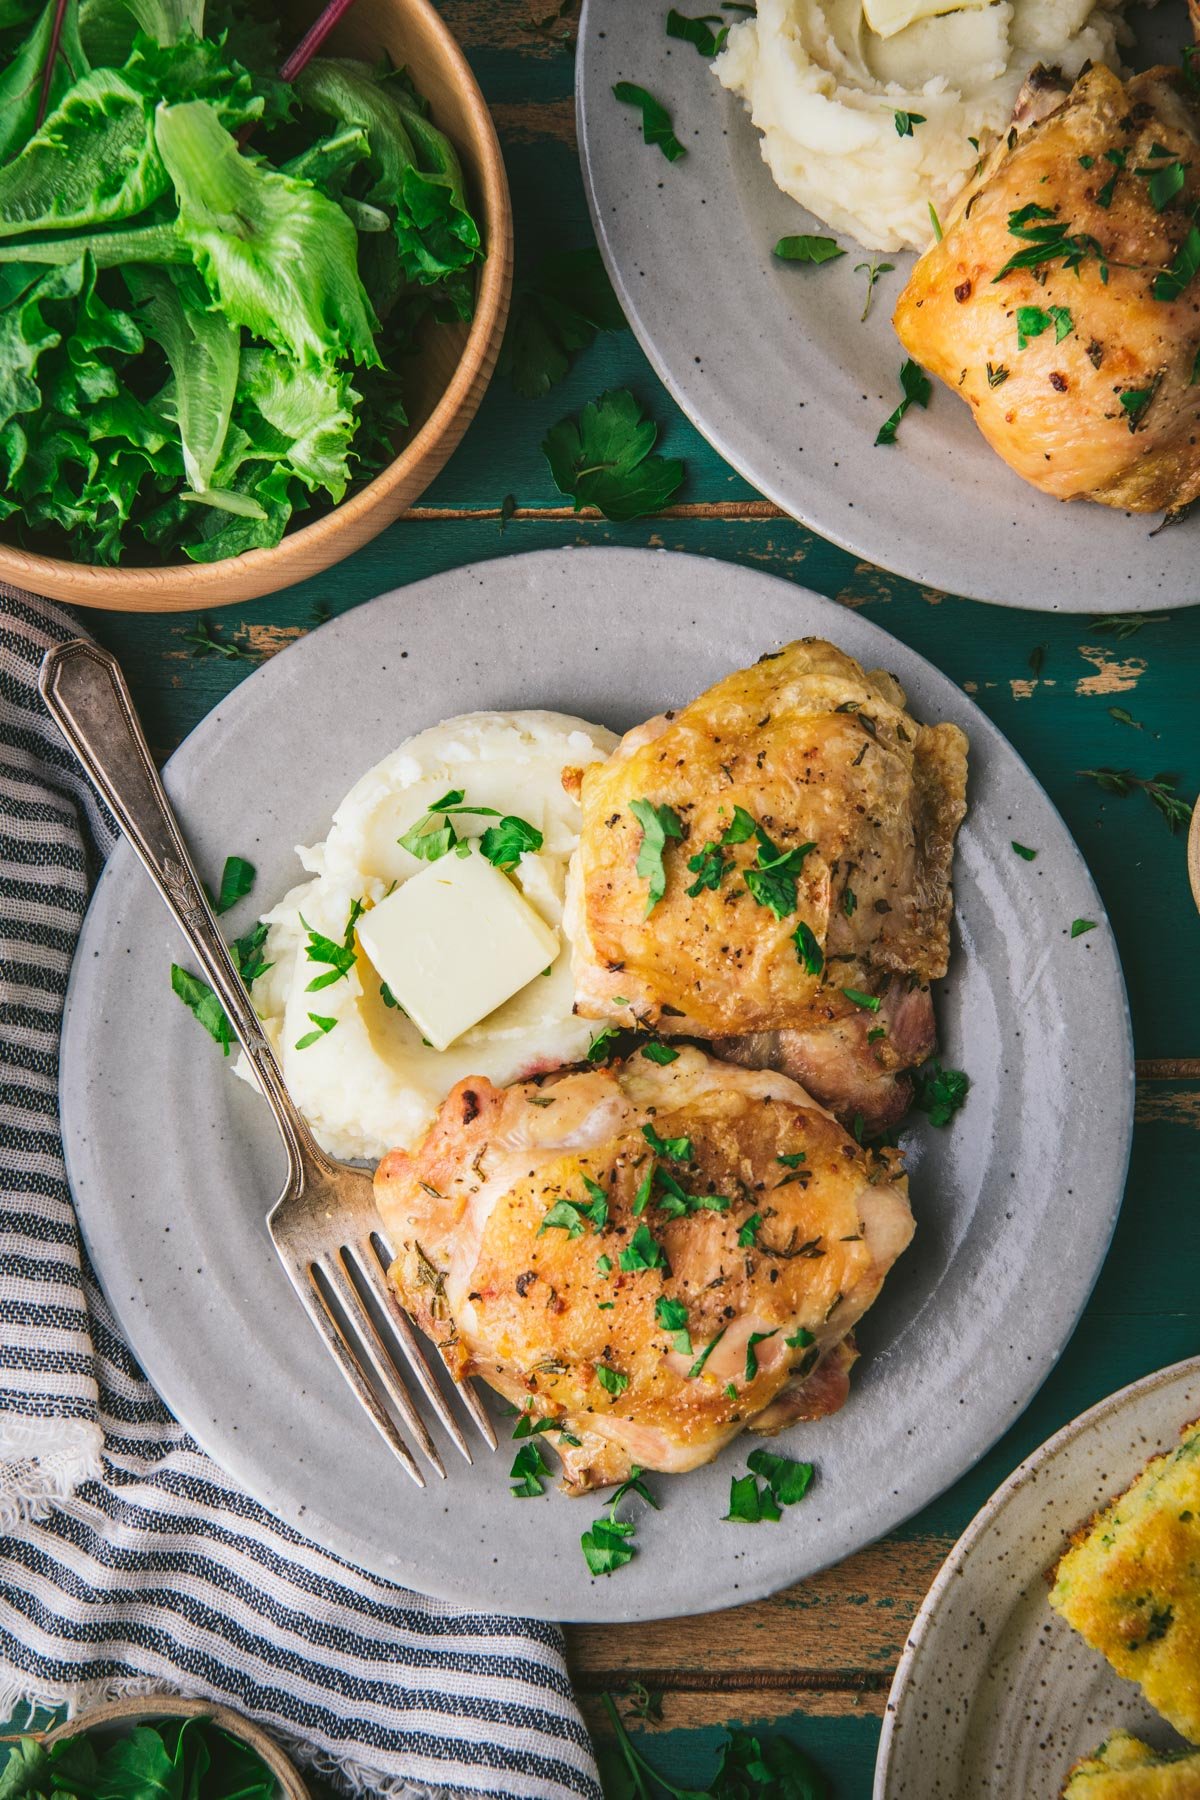 Baked chicken thighs on a plate with mashed potatoes.